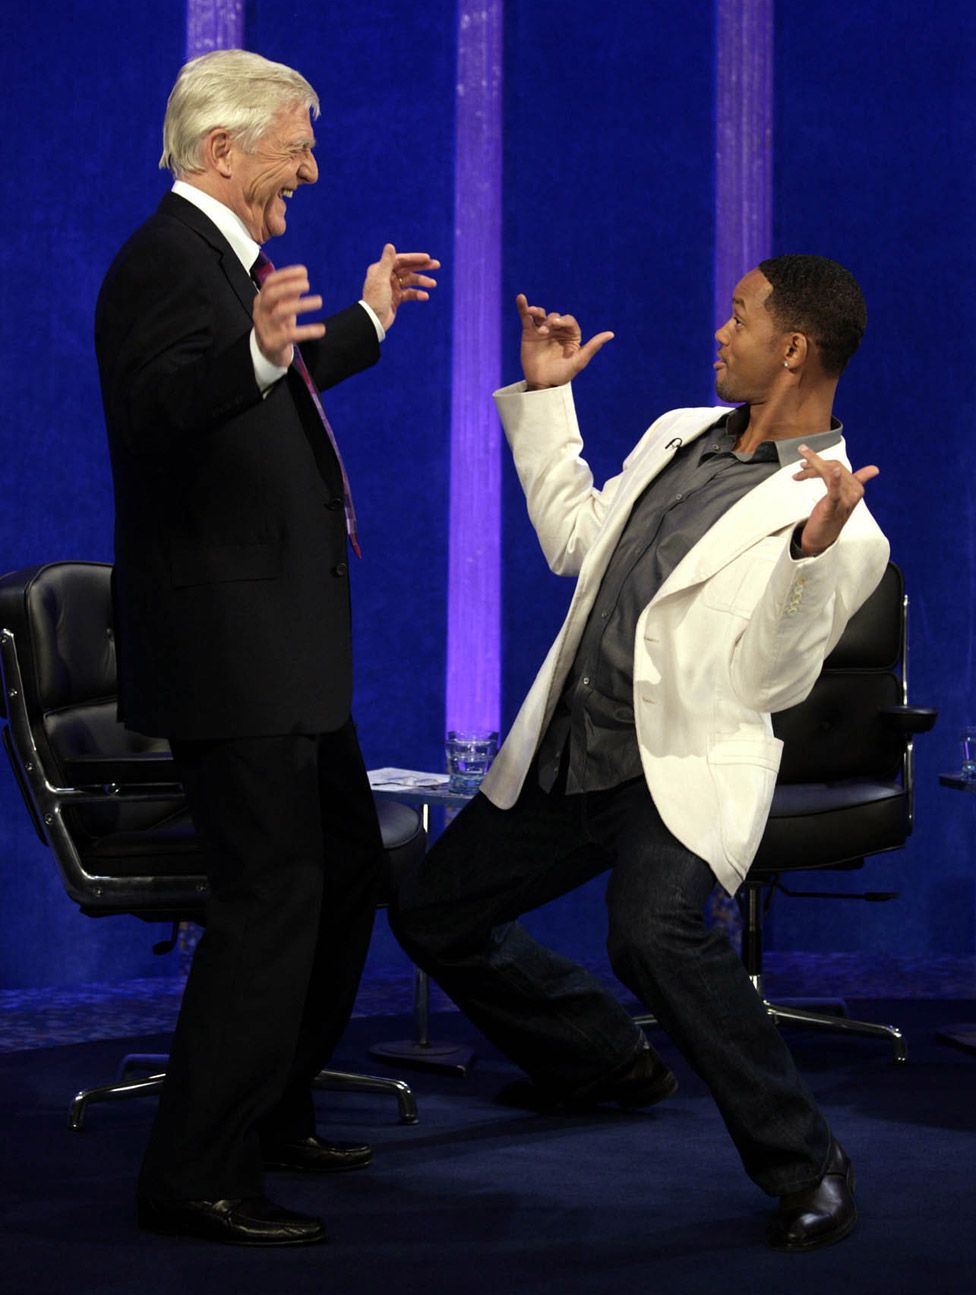 Sir Michael Parkinson and Will Smith dancing